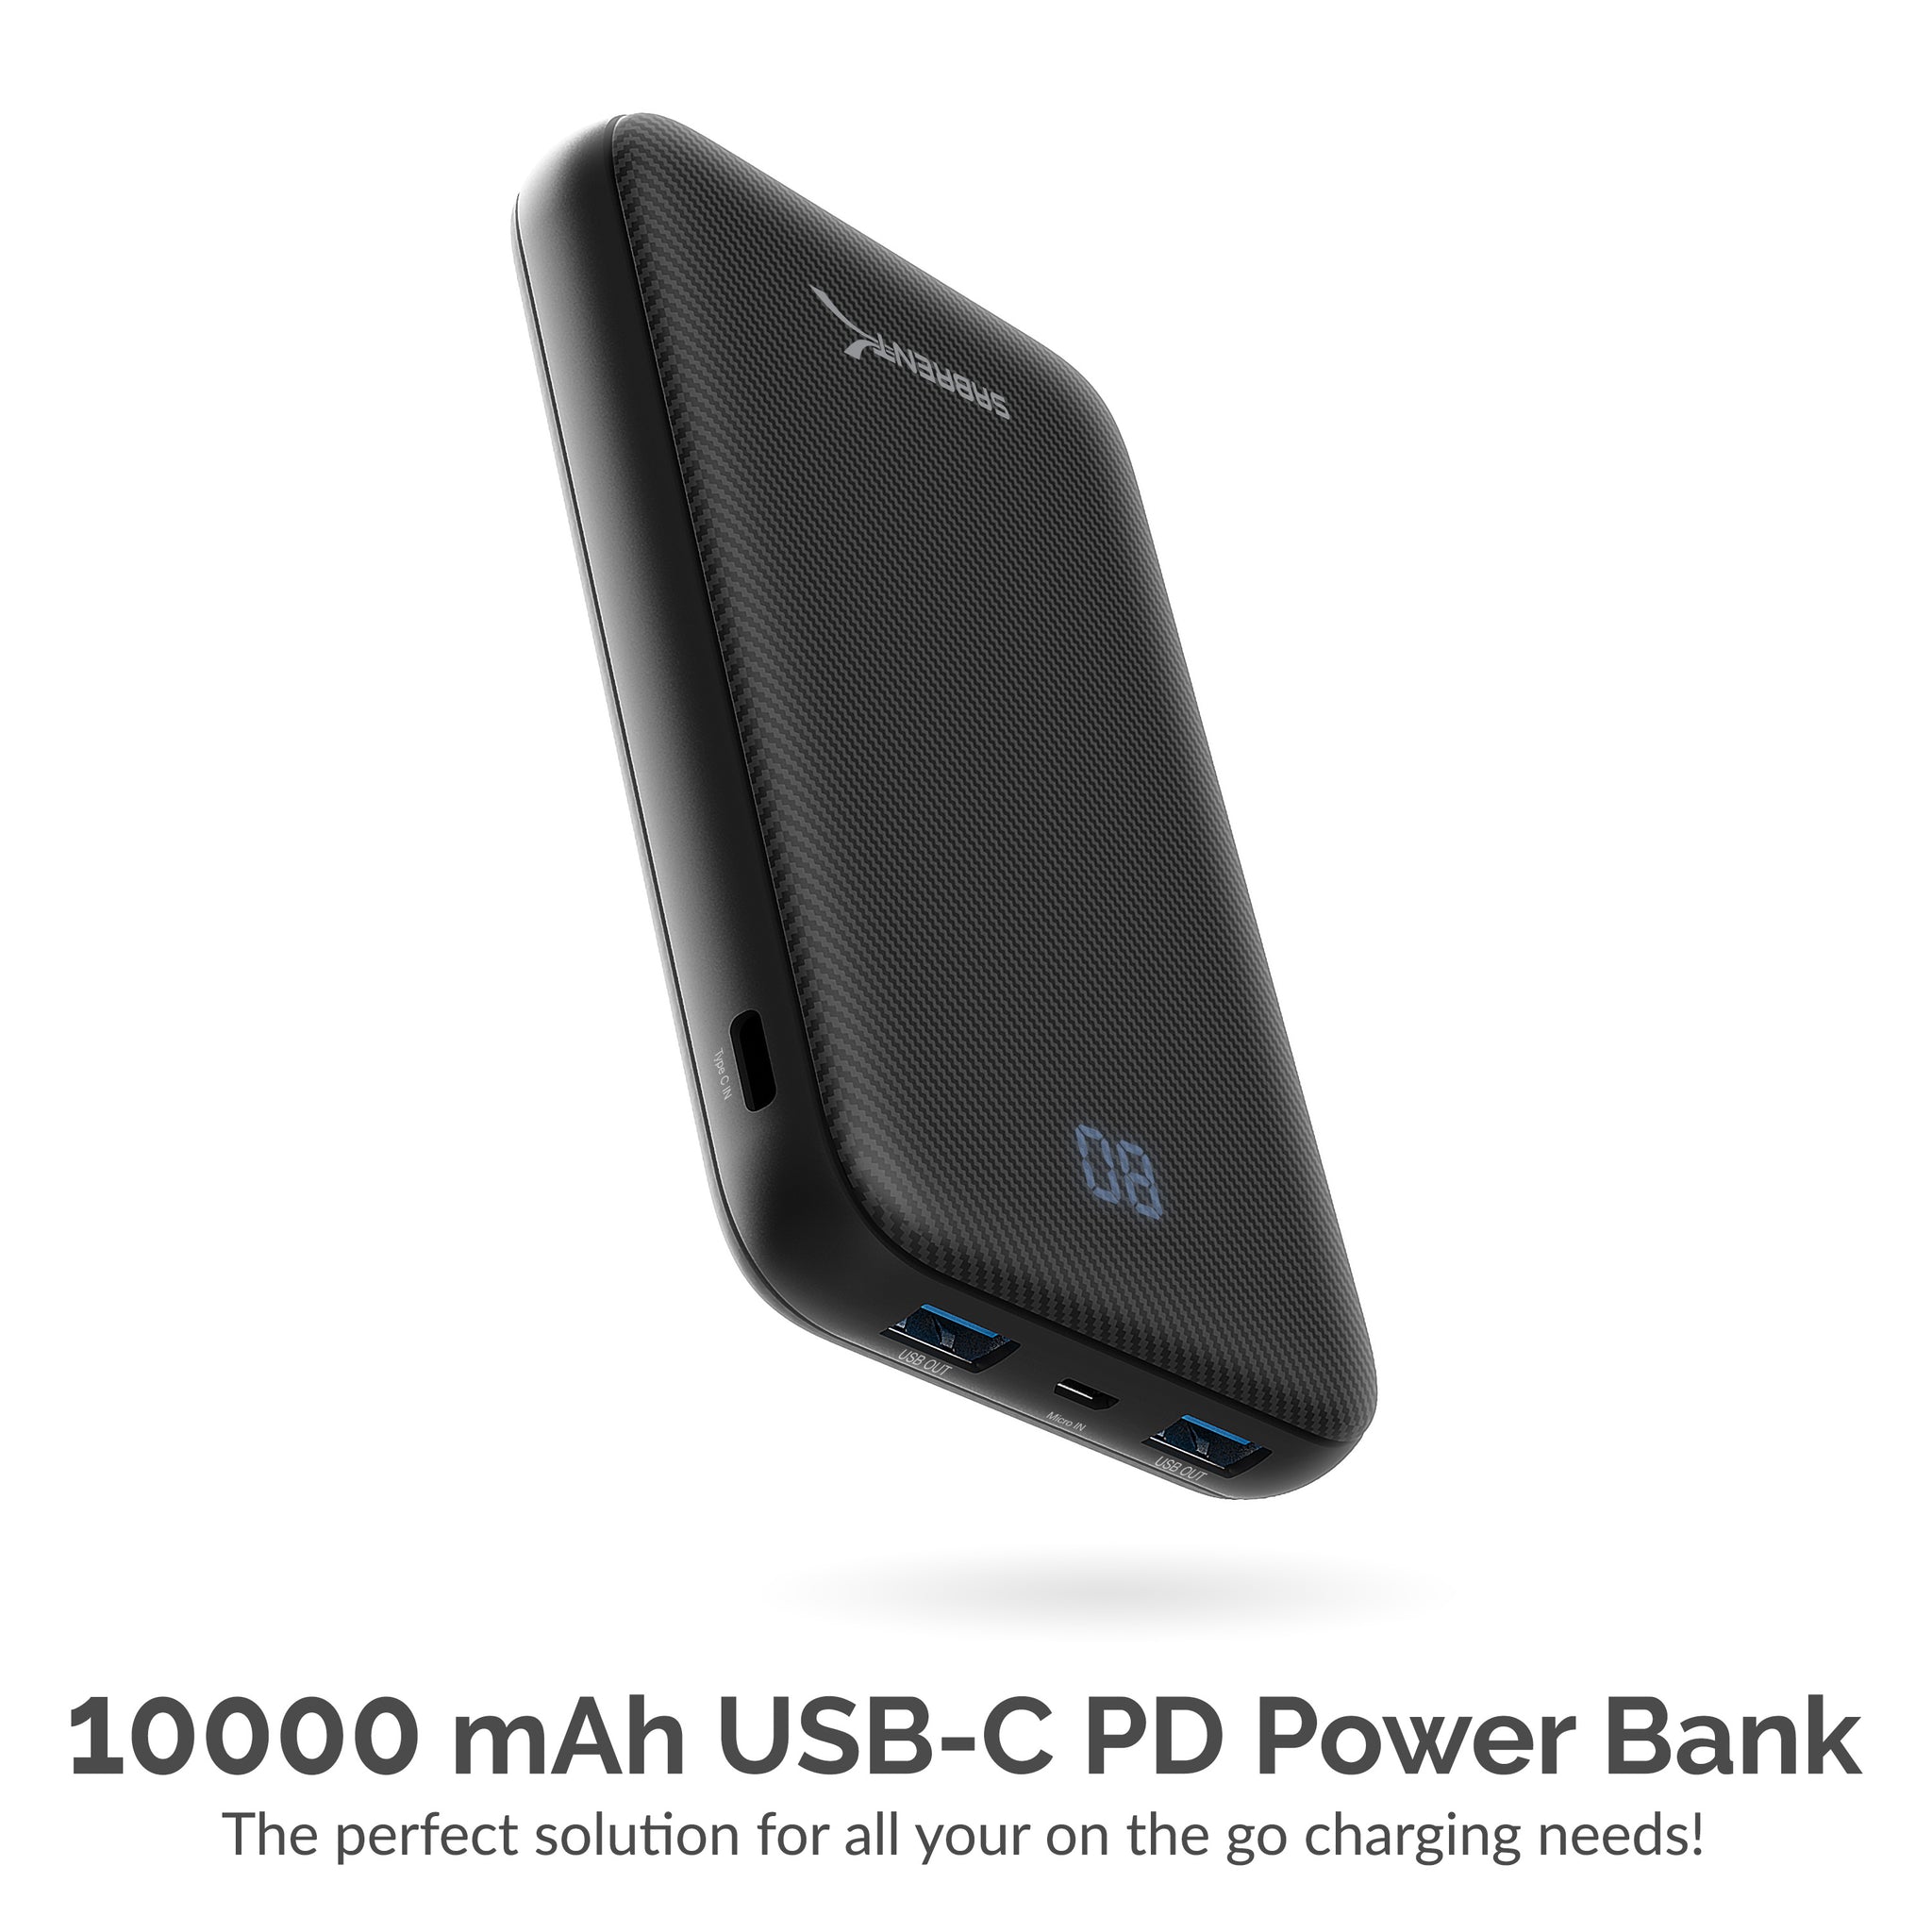 Sabrent PB-Y10B 10000 mAh USB C PD Power Bank with Quick Charge 3.0 ()